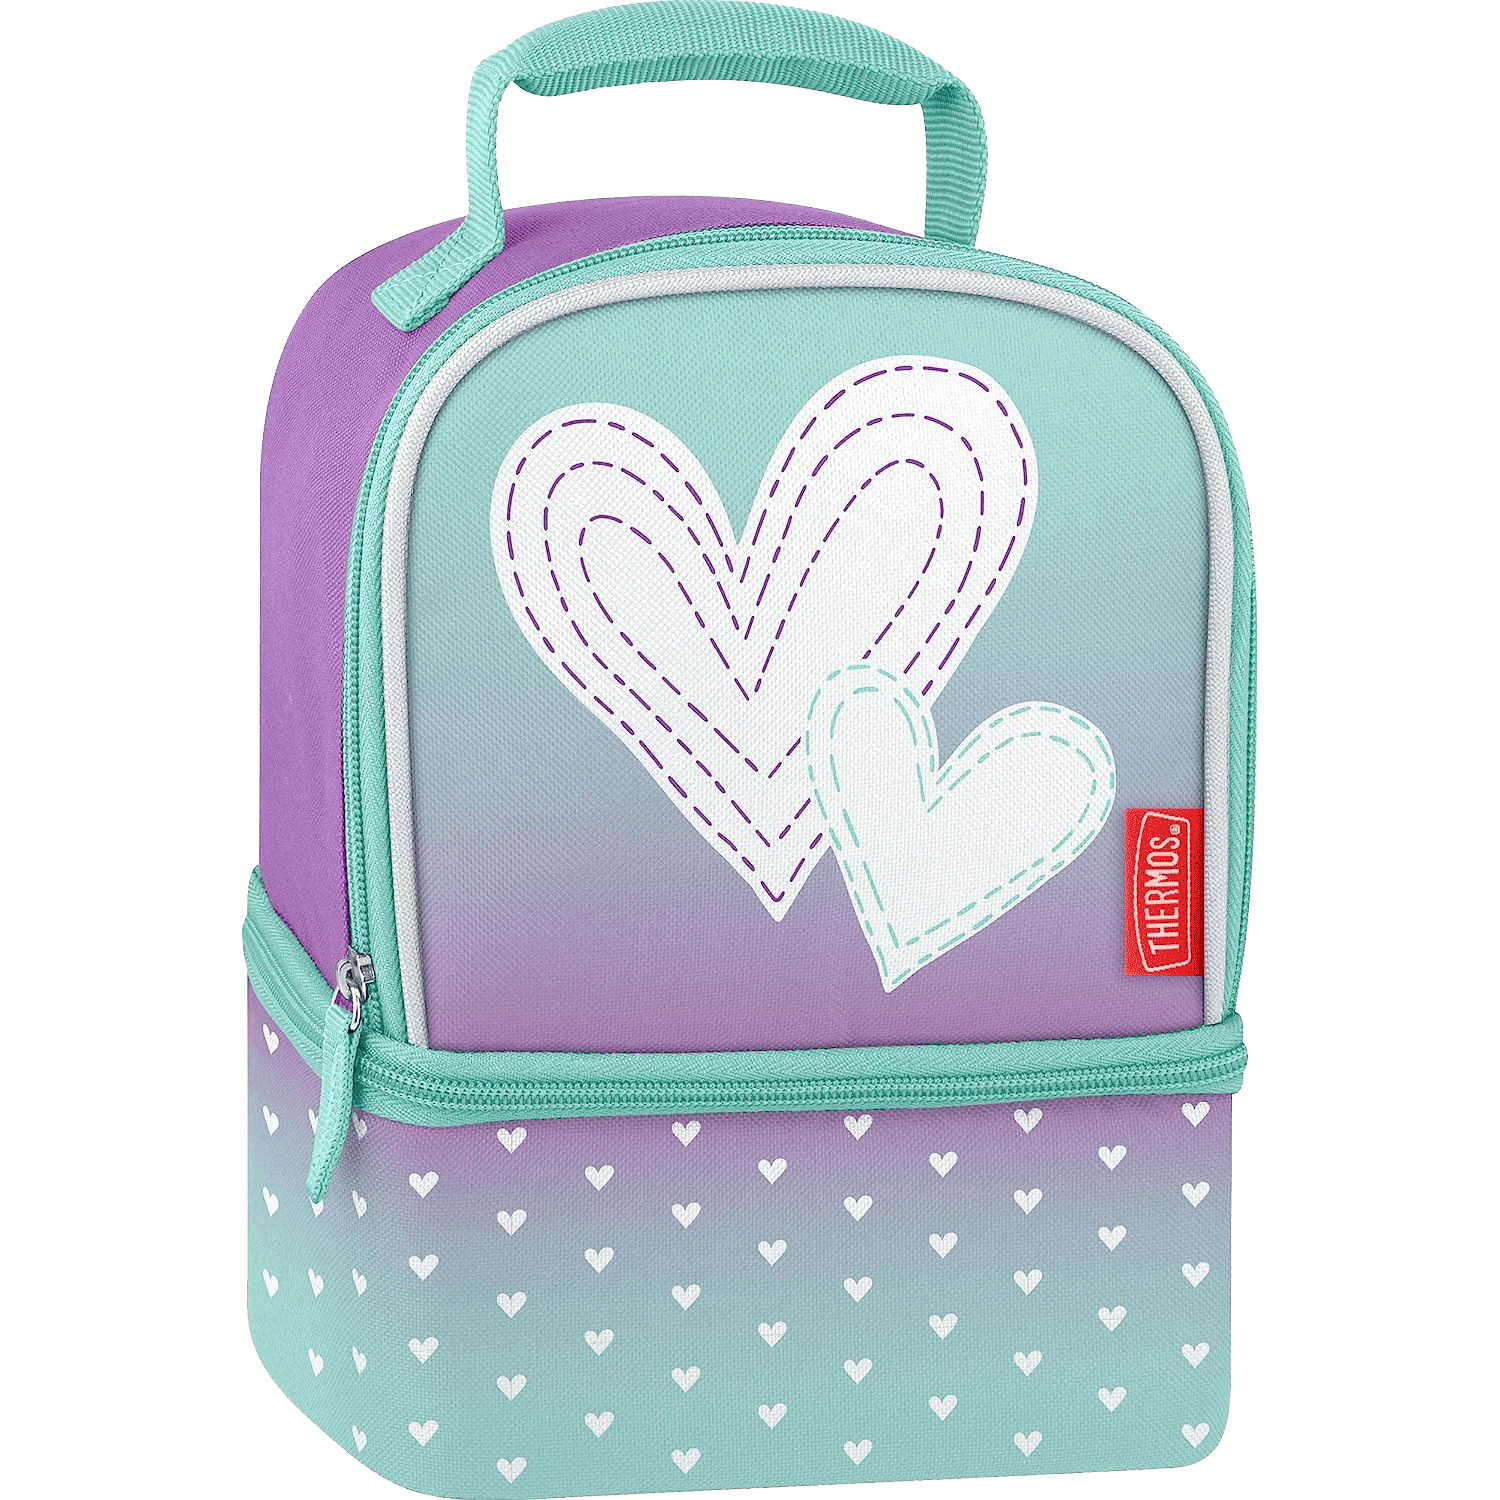 https://www.rossy.ca/media/A2W/products/thermos-dual-compartment-soft-lunch-box-hearts-83184-1.jpg